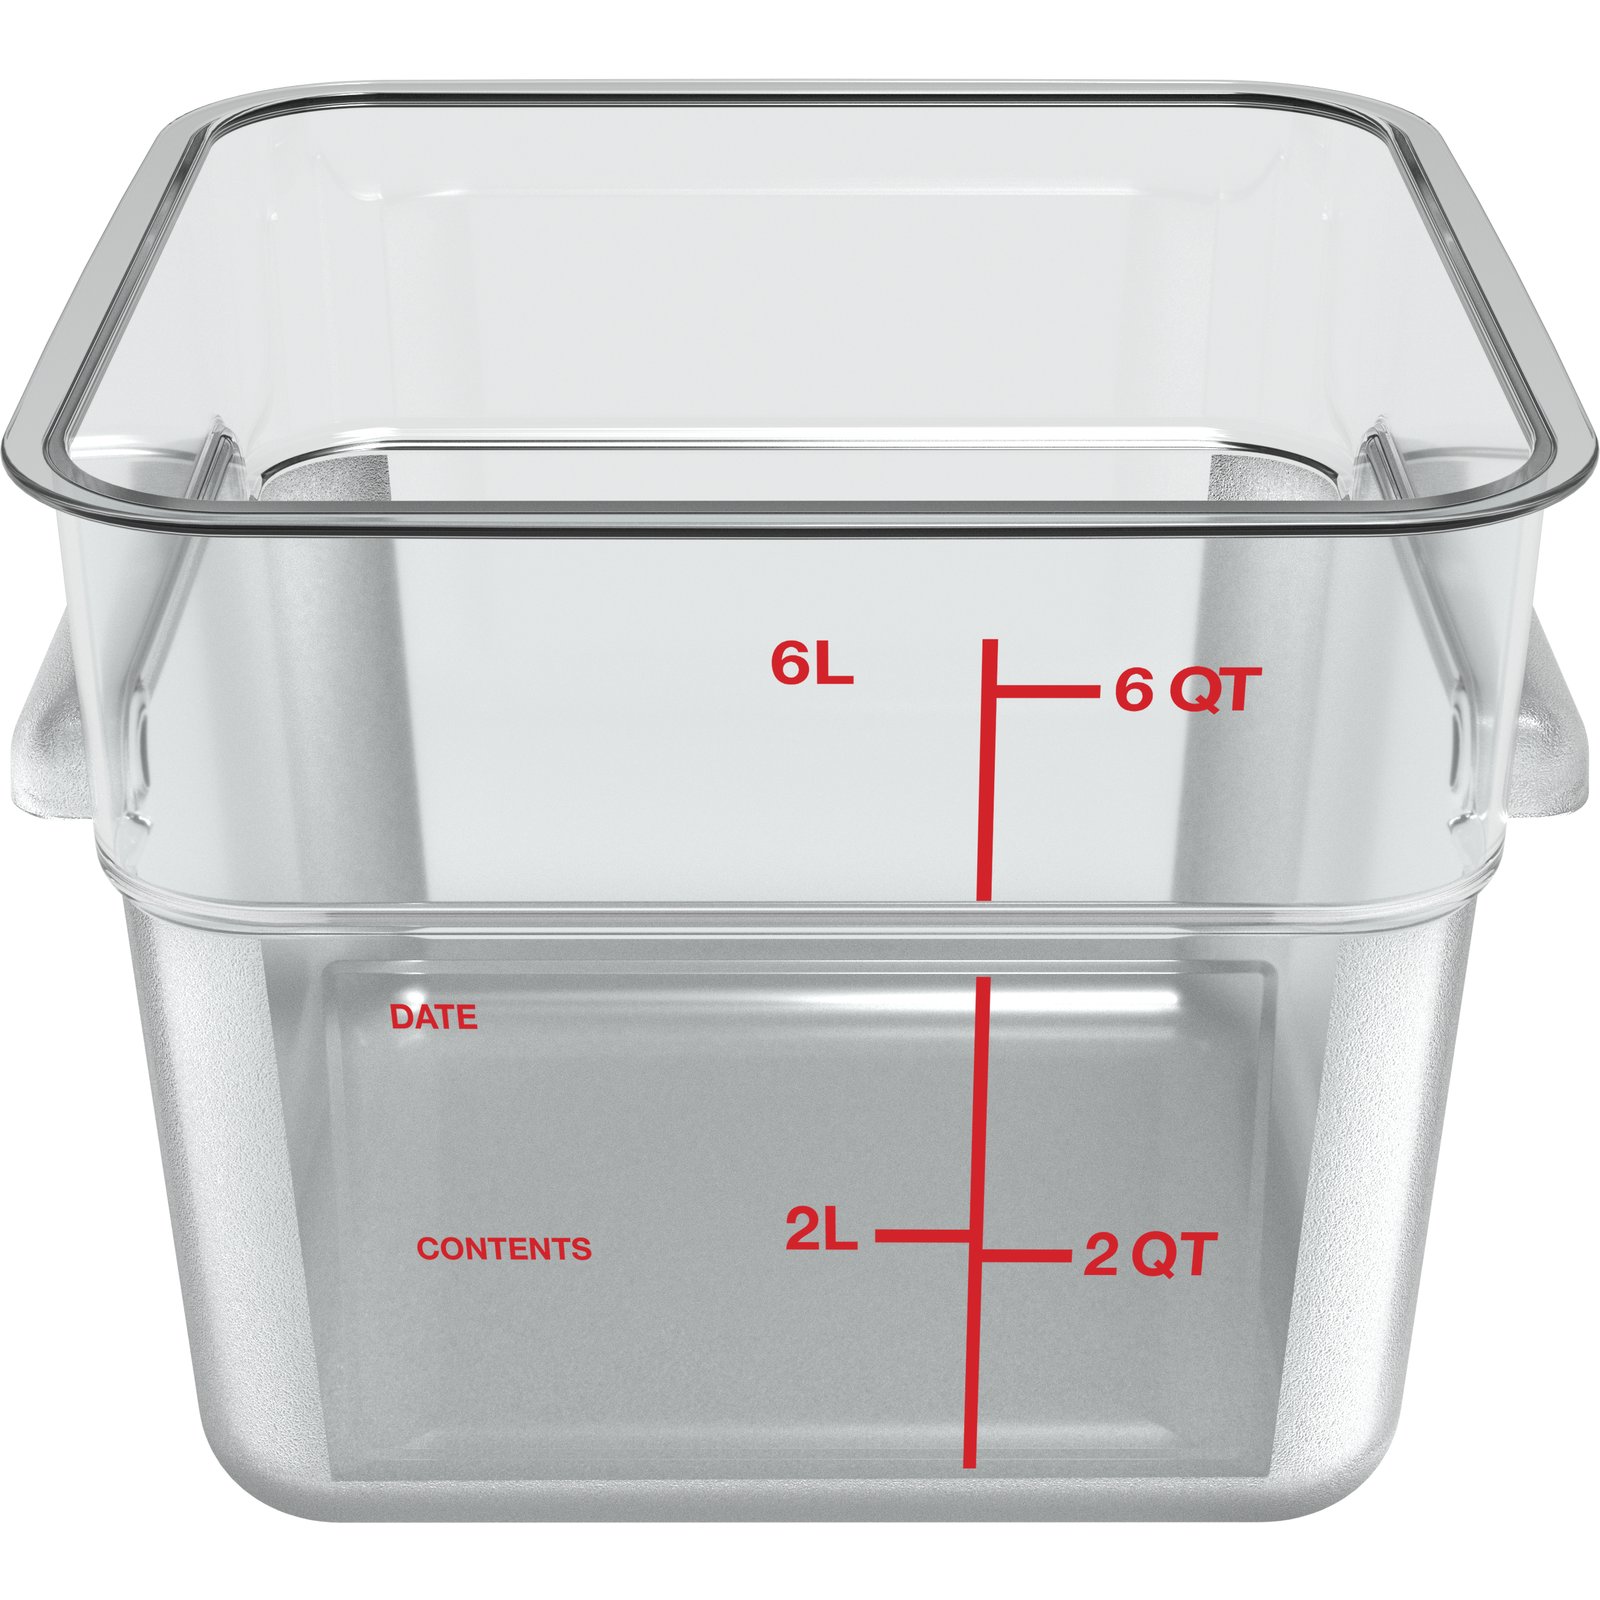 Hakka 6 qt Commercial Grade Square Food Storage Containers with Lids,Polycarbonate,Clear - Case of 5